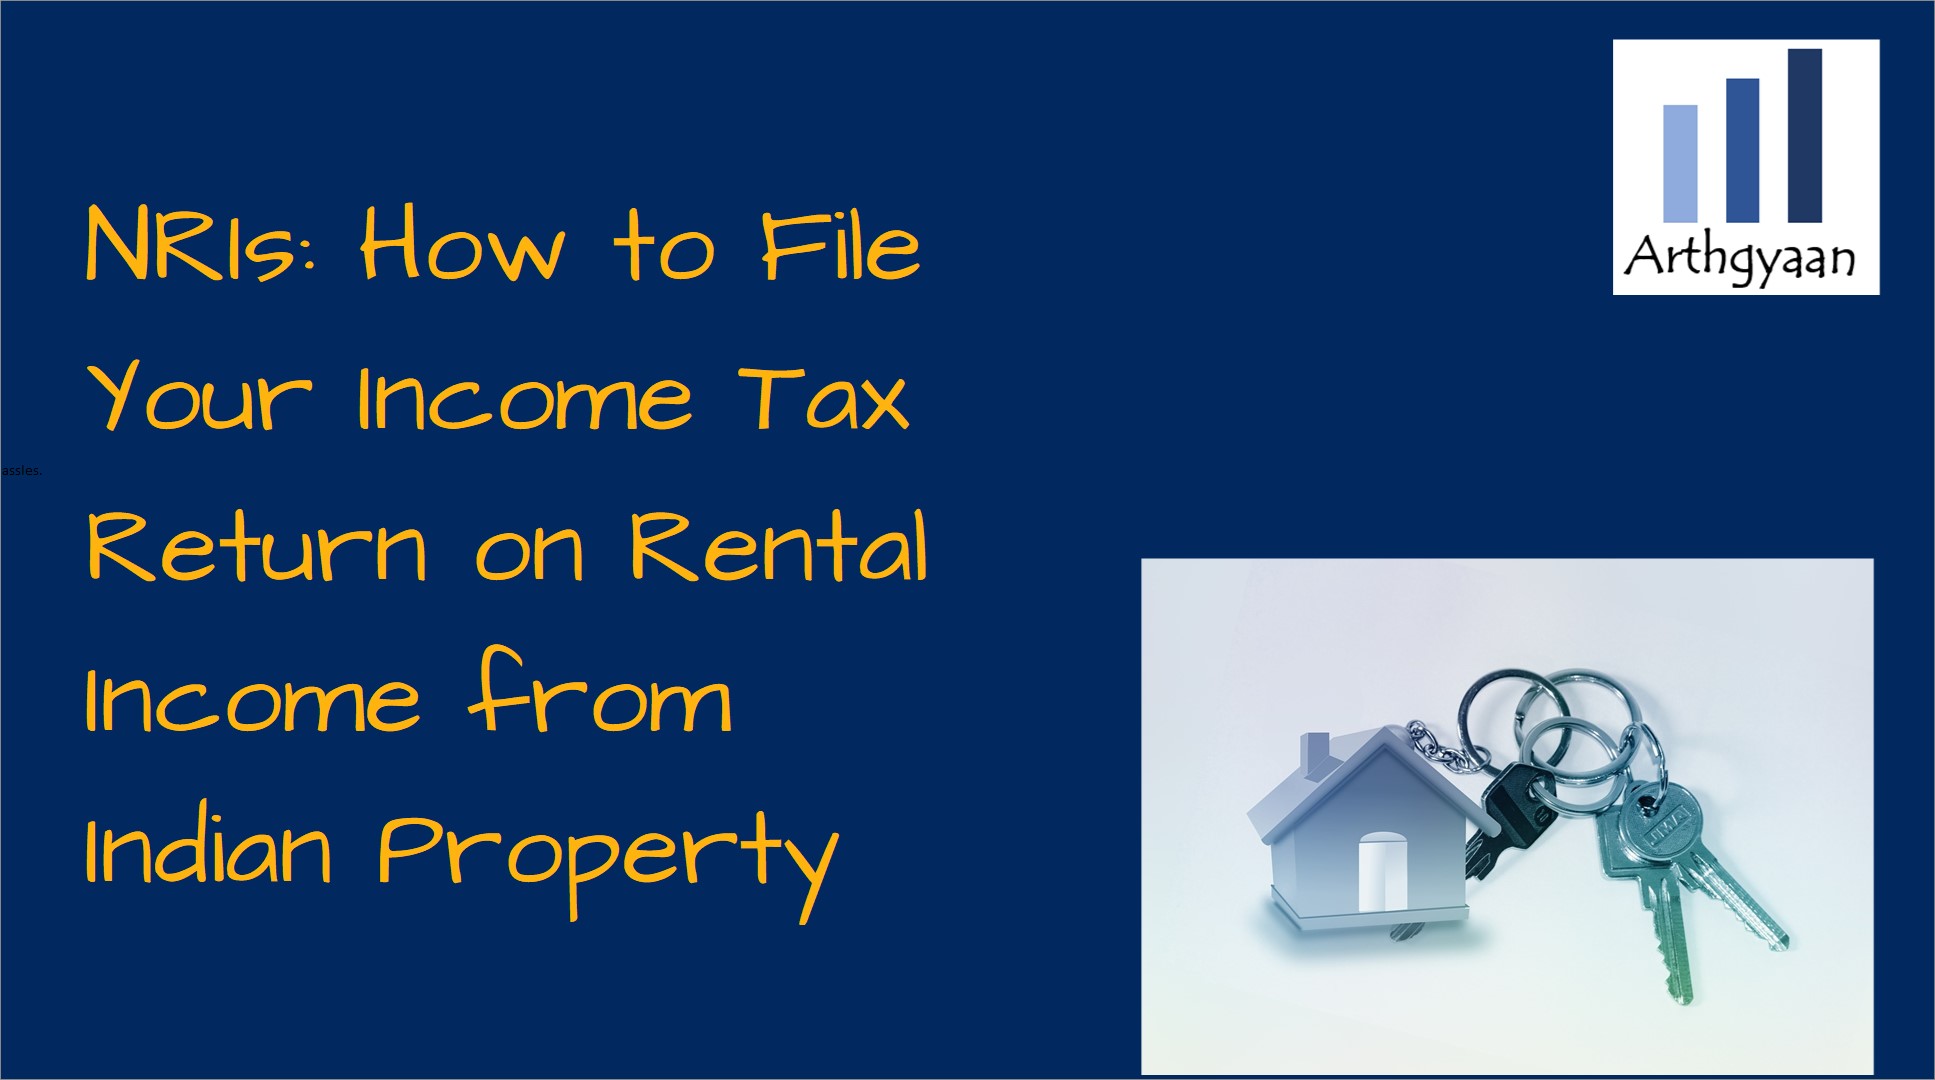 <p>NRIs must file your income tax return on rental income from Indian property the right way. Learn about the tax deductions you can claim and how to file your return without hassles.</p>

